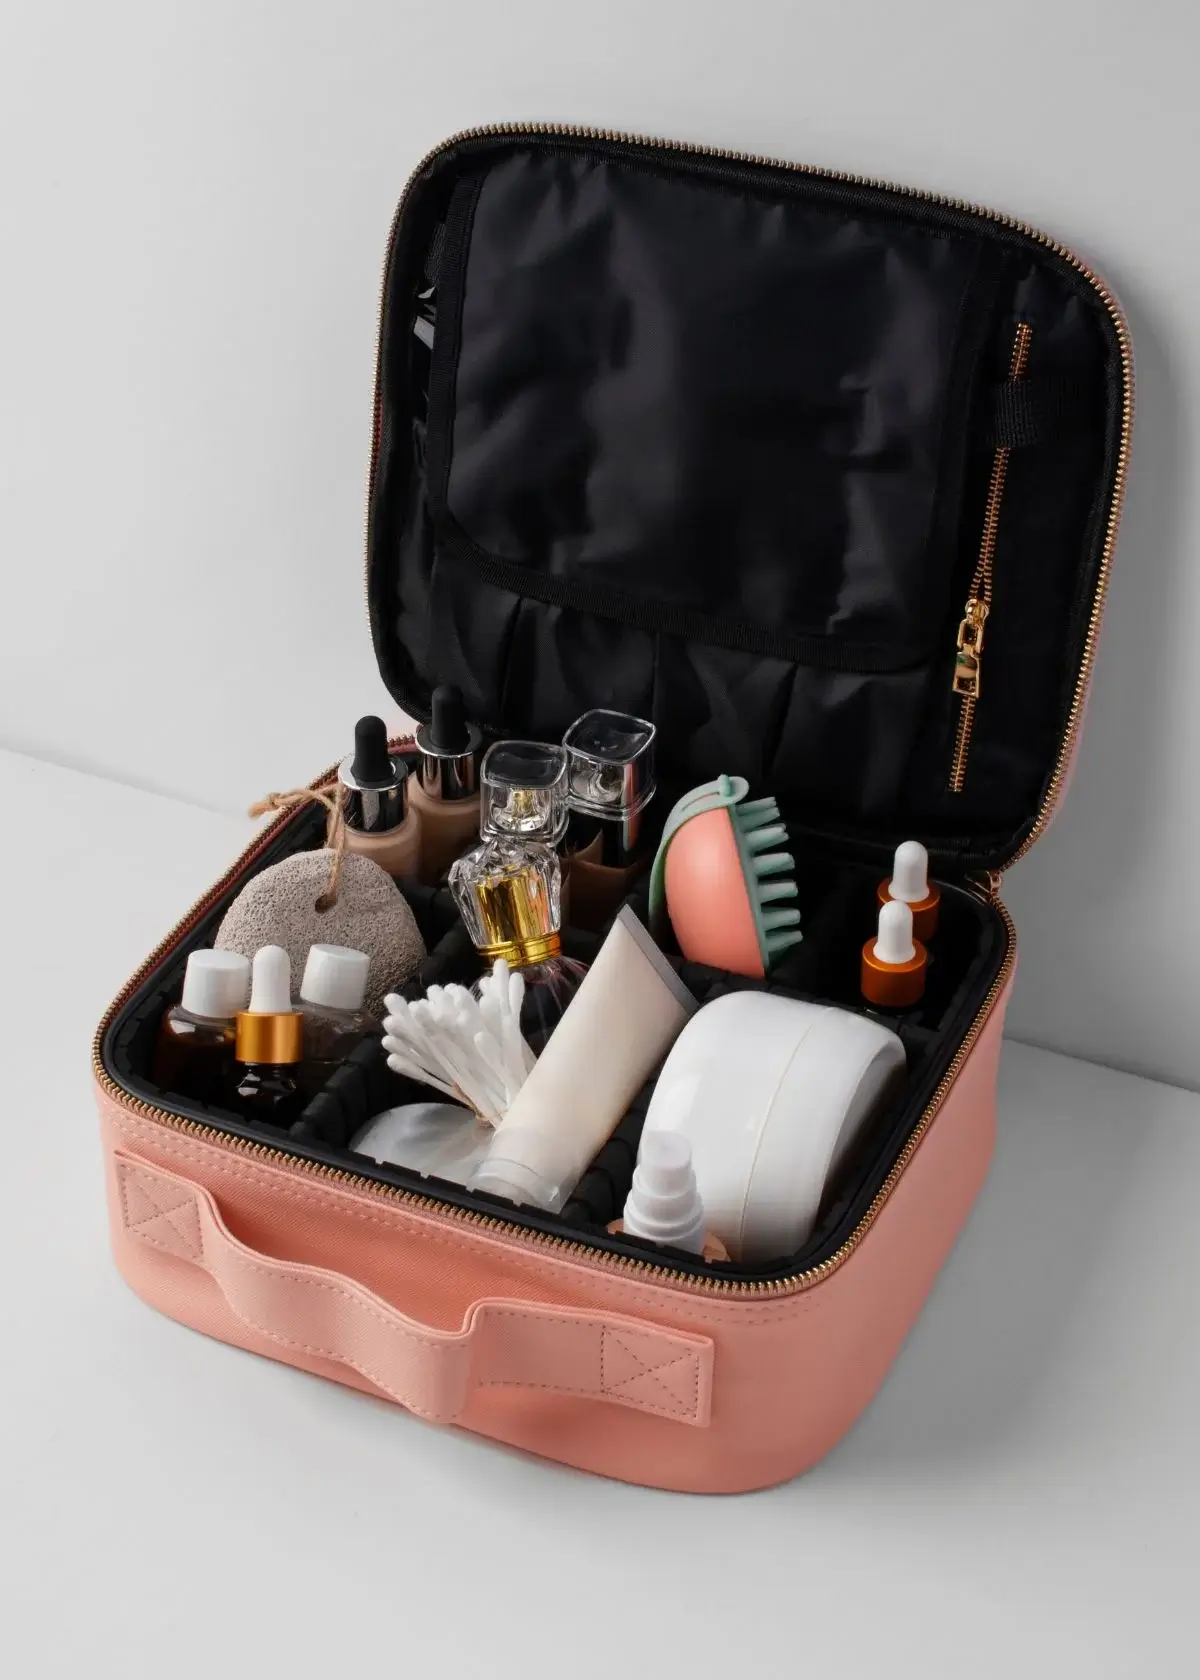 How to choose the right Travel Makeup Bag?